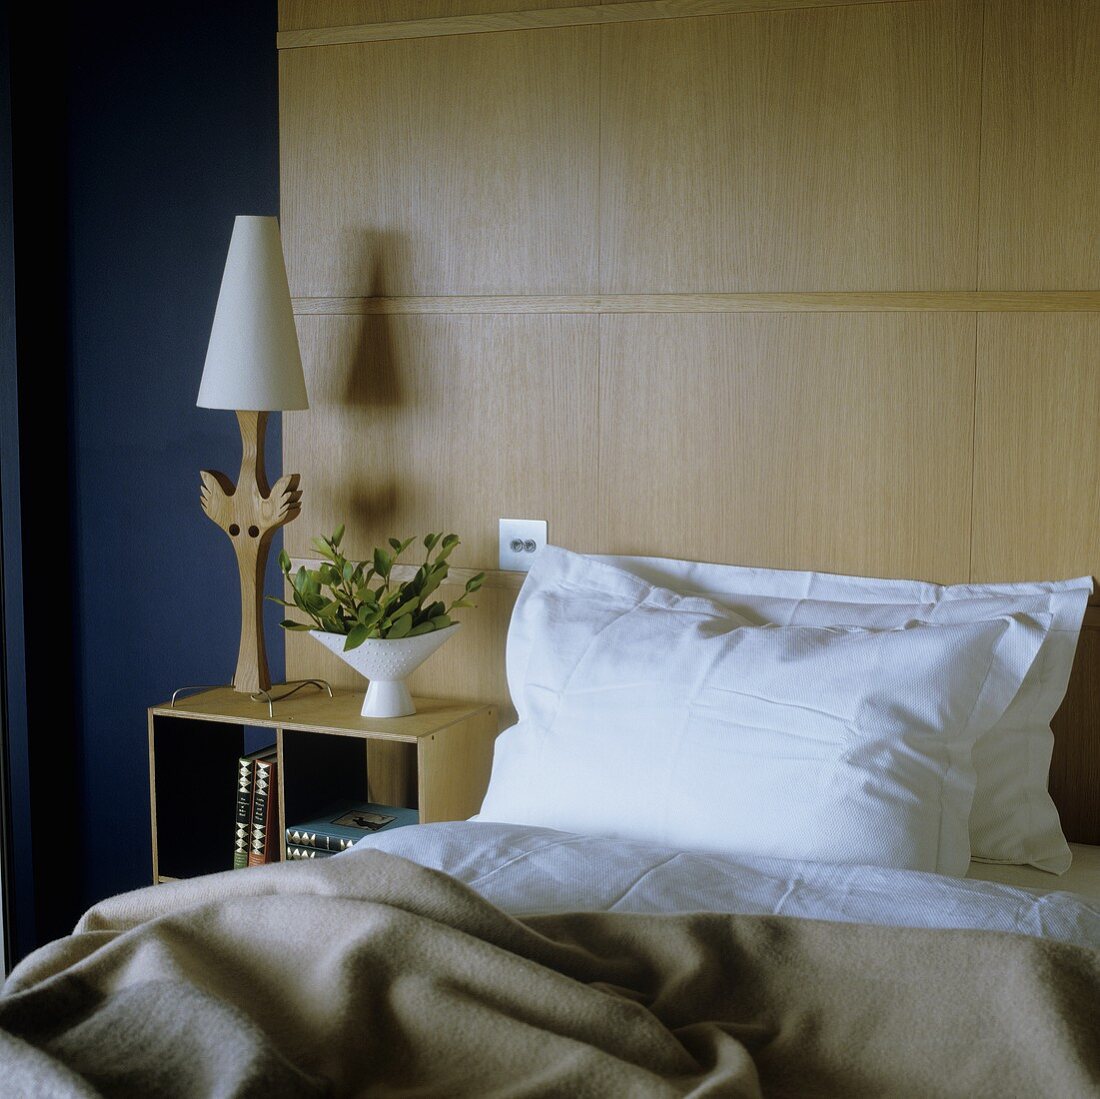 Bed in front of a wood paneled wall and night stand with table lamp